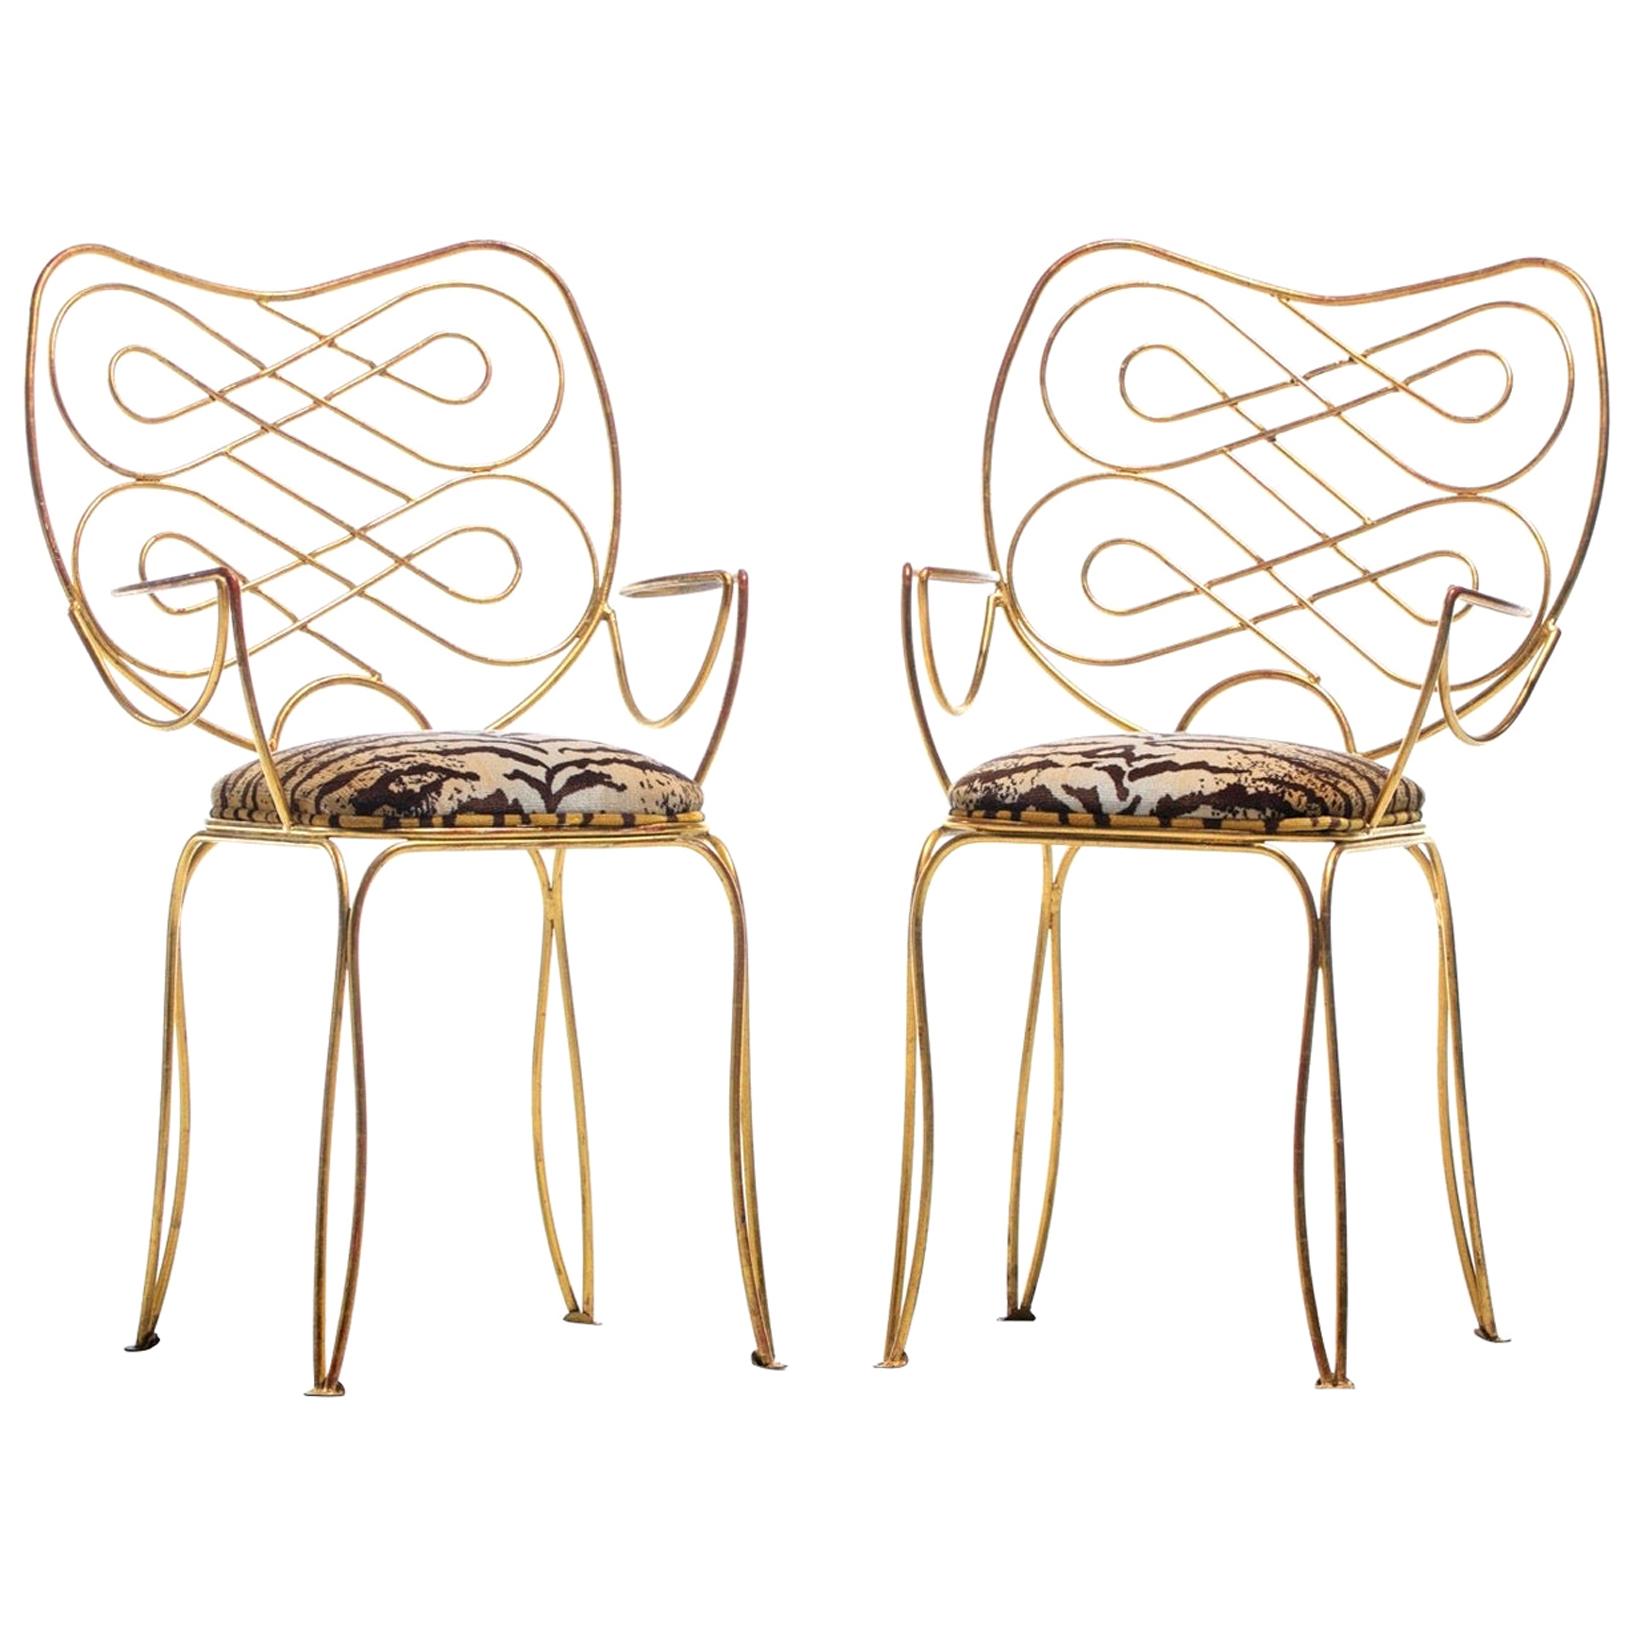 Pair of René Prou Style French Gilt Metal Chairs with Italian Tiger Velvet Seats